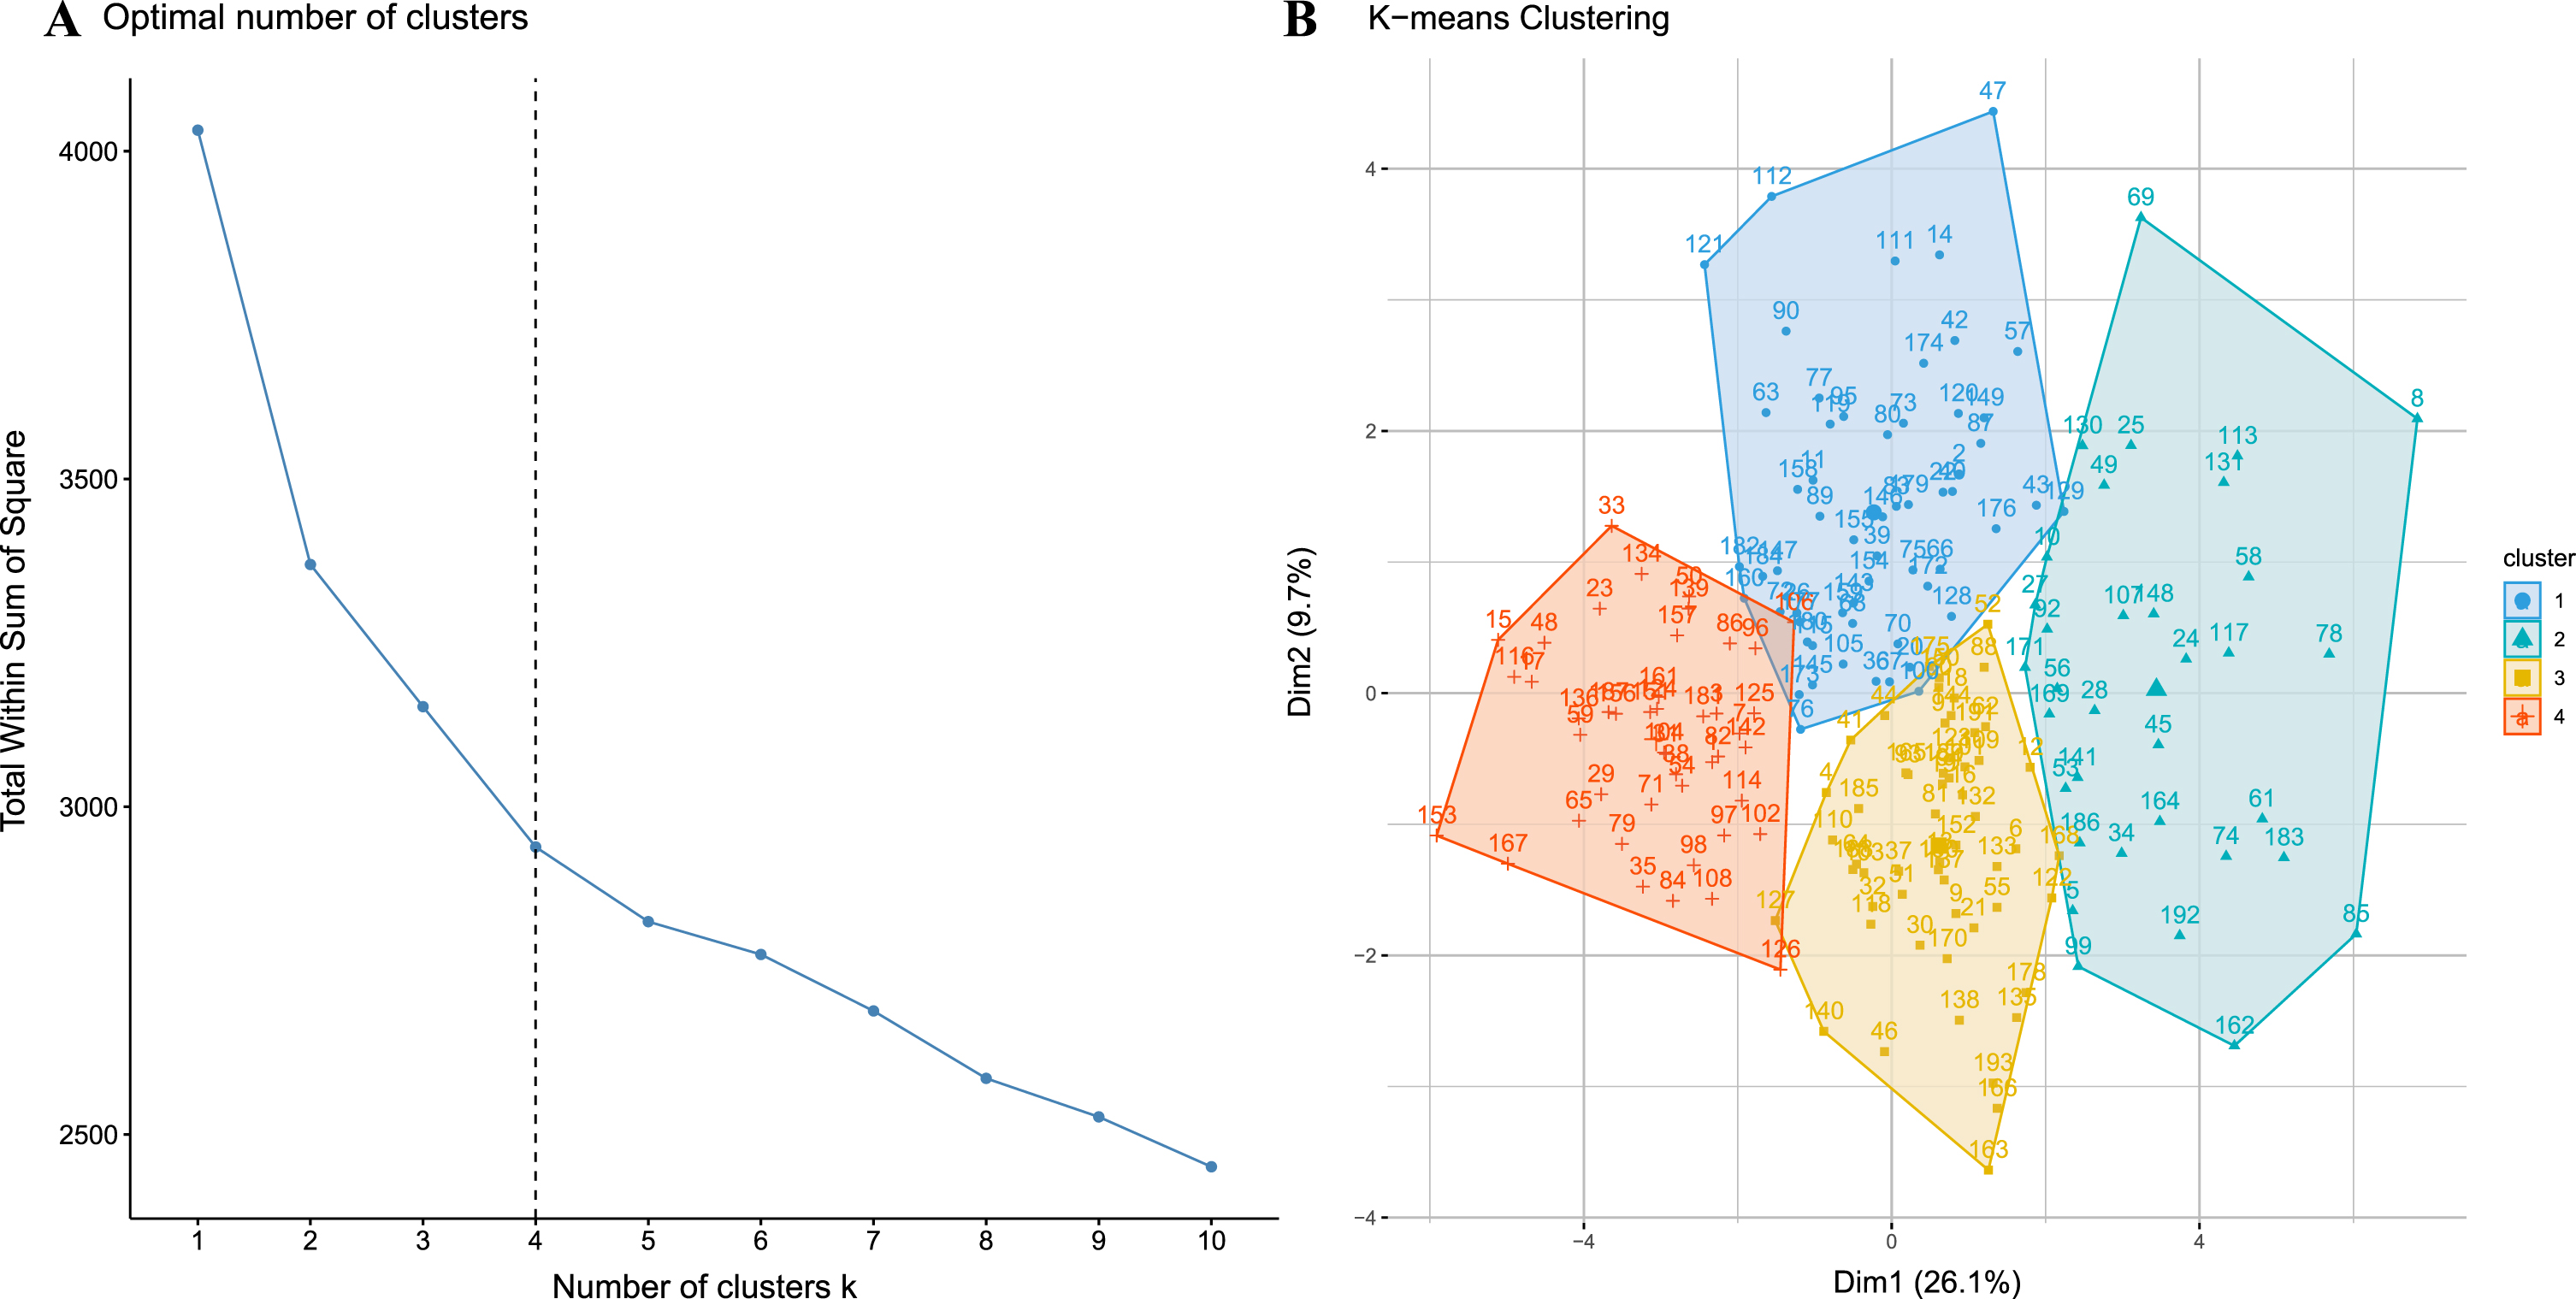 A) The inflection point chart shows that the optimal number of clusters is 4, calculated by the open-source factoextra package in R. B) shows the four clusters identified by k-means clustering visually.